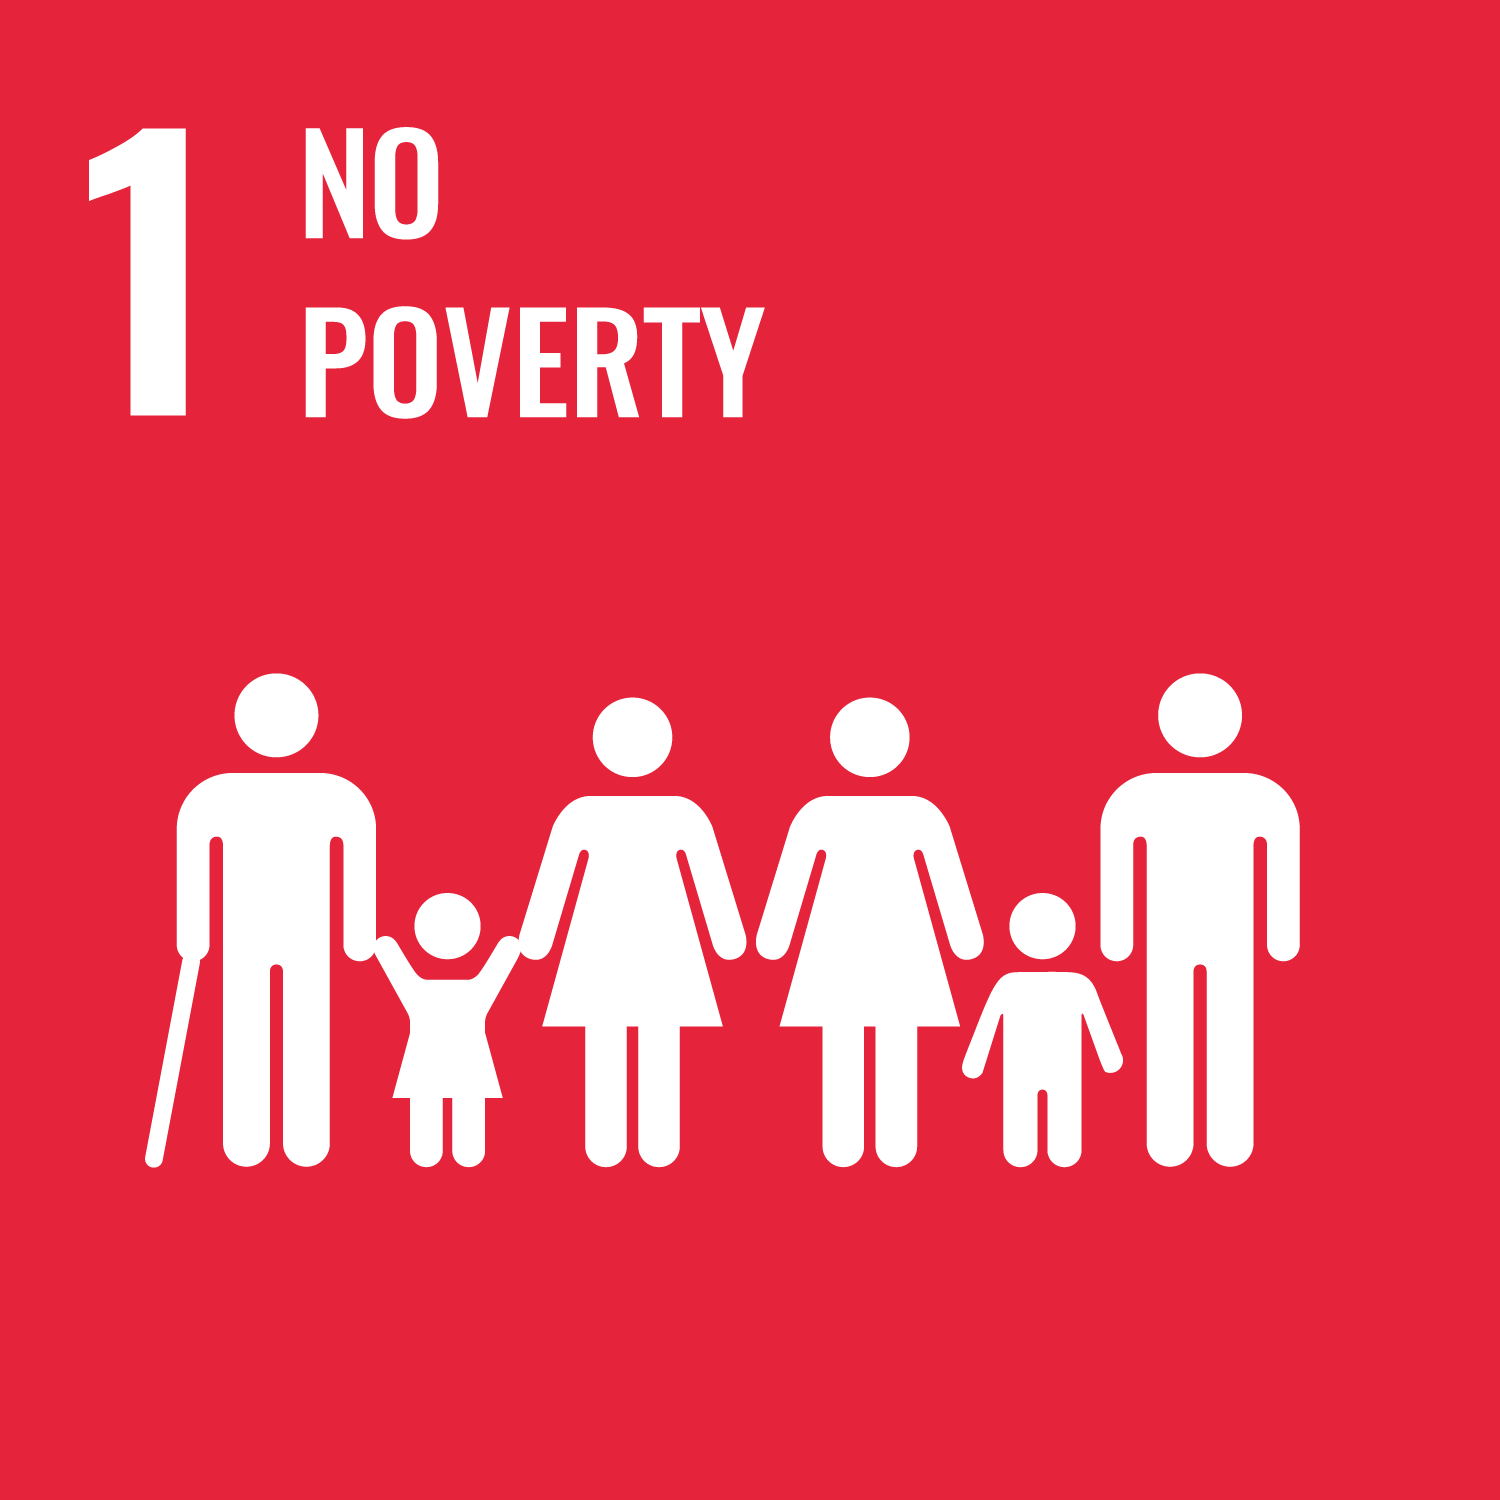 Related UN Sustainable Development Goals icon 1